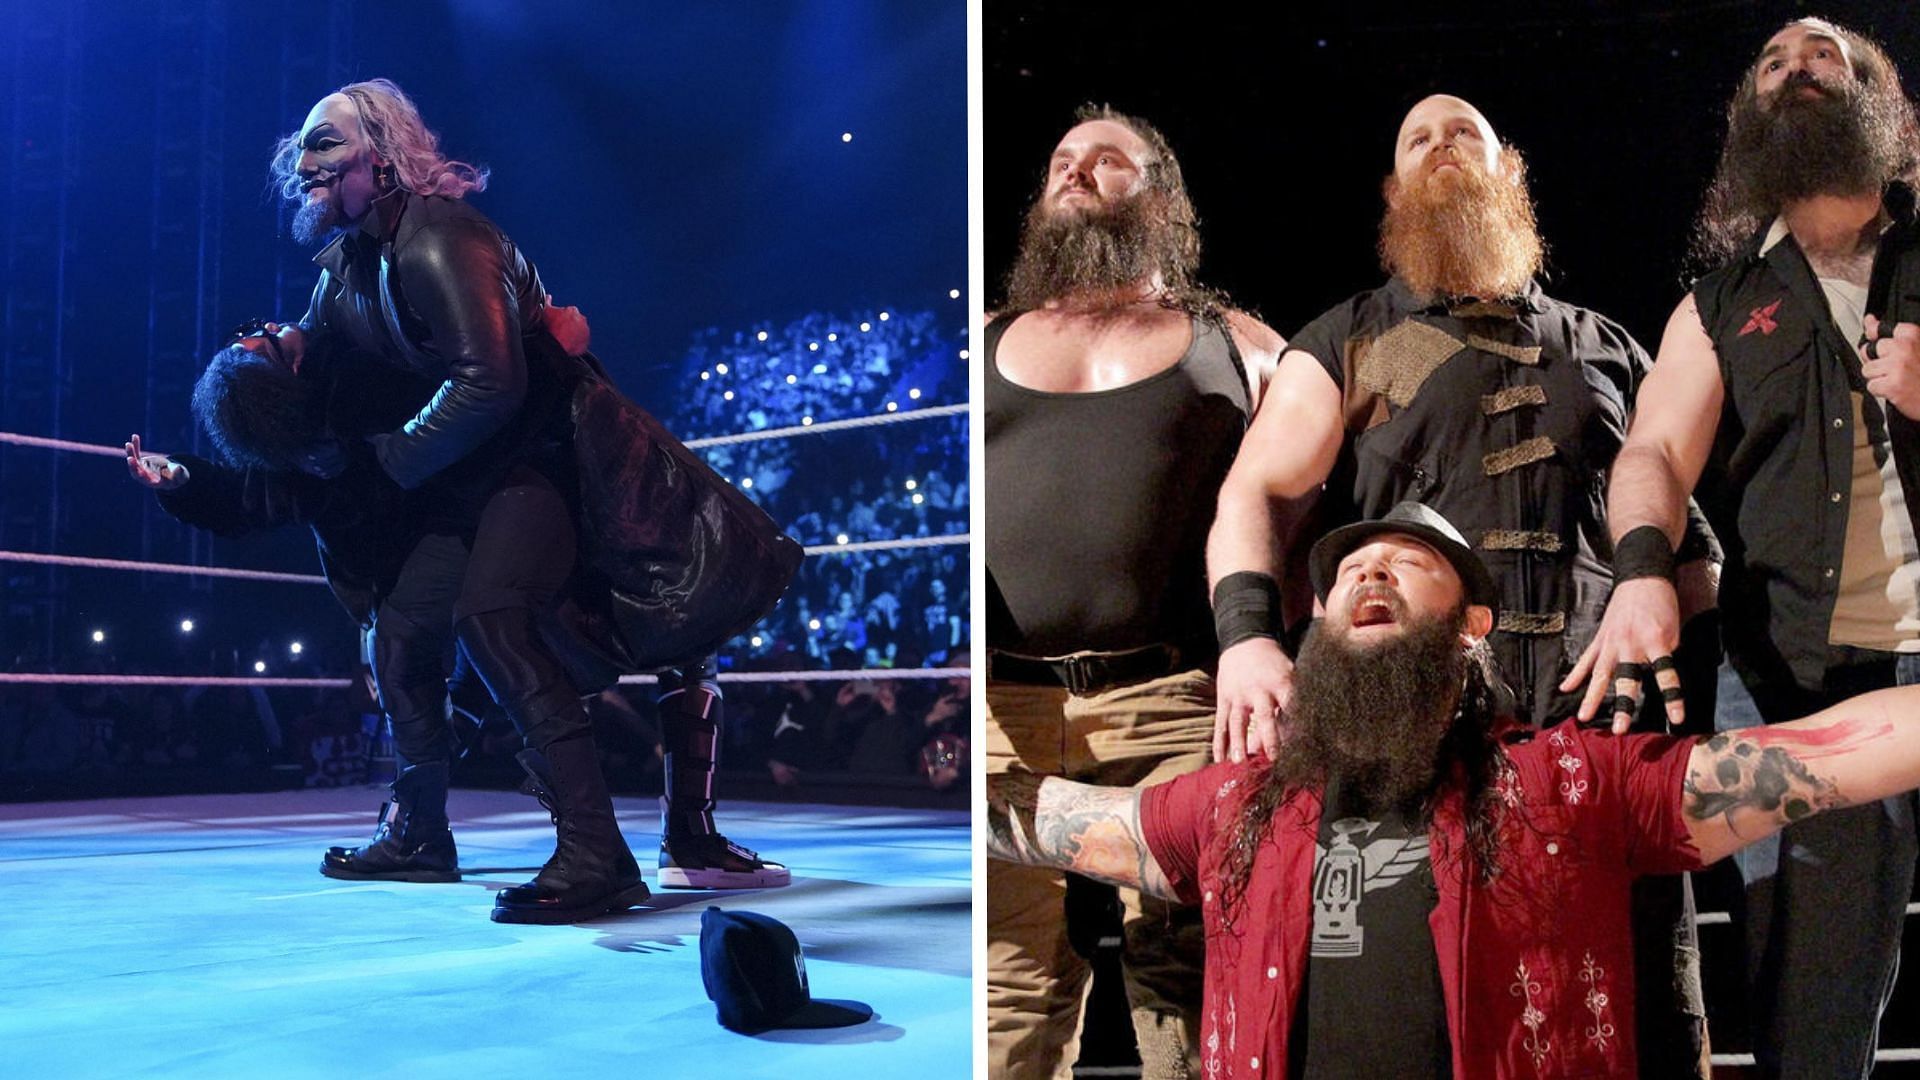 The Wyatt 6 could be nearing its appearance on WWE